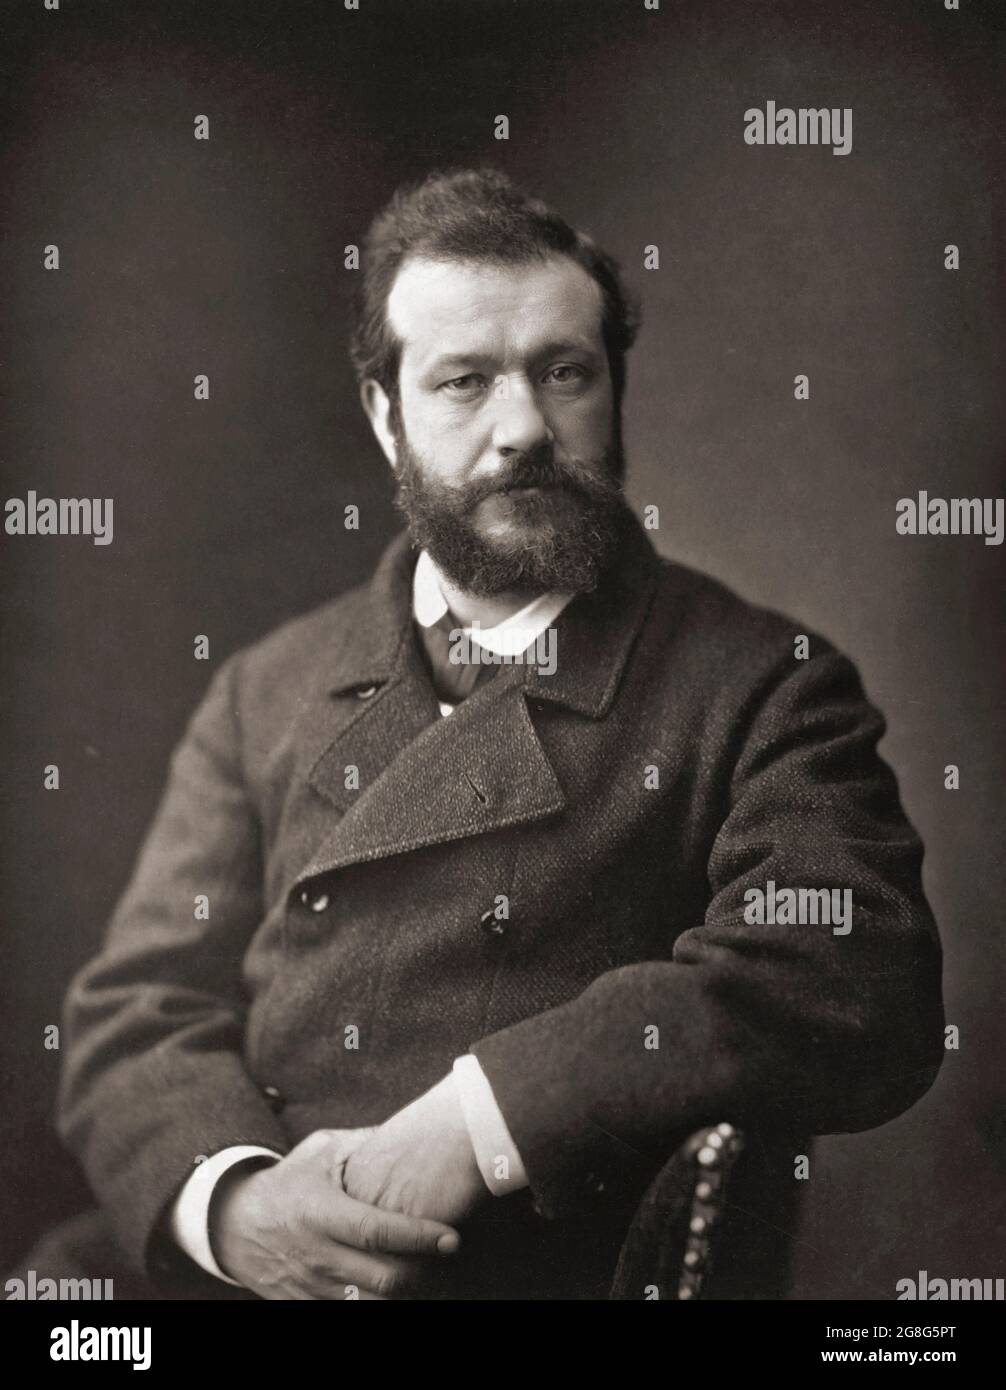 Félix Henri Bracquemond, 1833 – 1914.  French artist and etcher, who encouraged several Impressionist artists, including Degas and Pissarro to experiment with printmaking techniques.  After a photogaph by Emile Courtin, circa 1878. Stock Photo